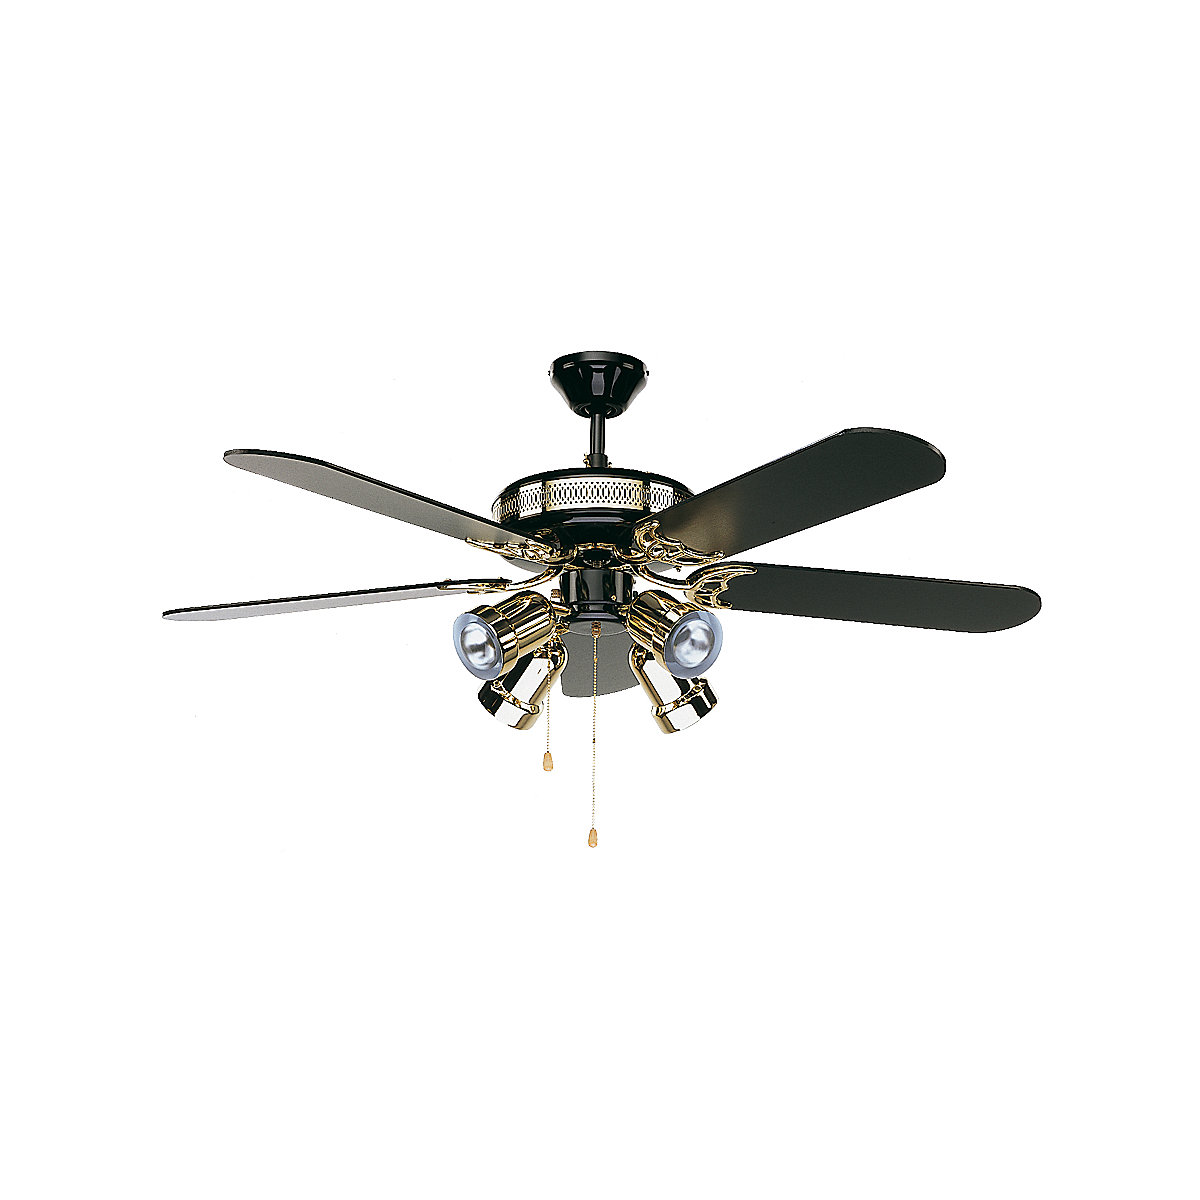 BLACK MAGIC ceiling fan, rotor blade Ø 1320 mm, with lamp-1